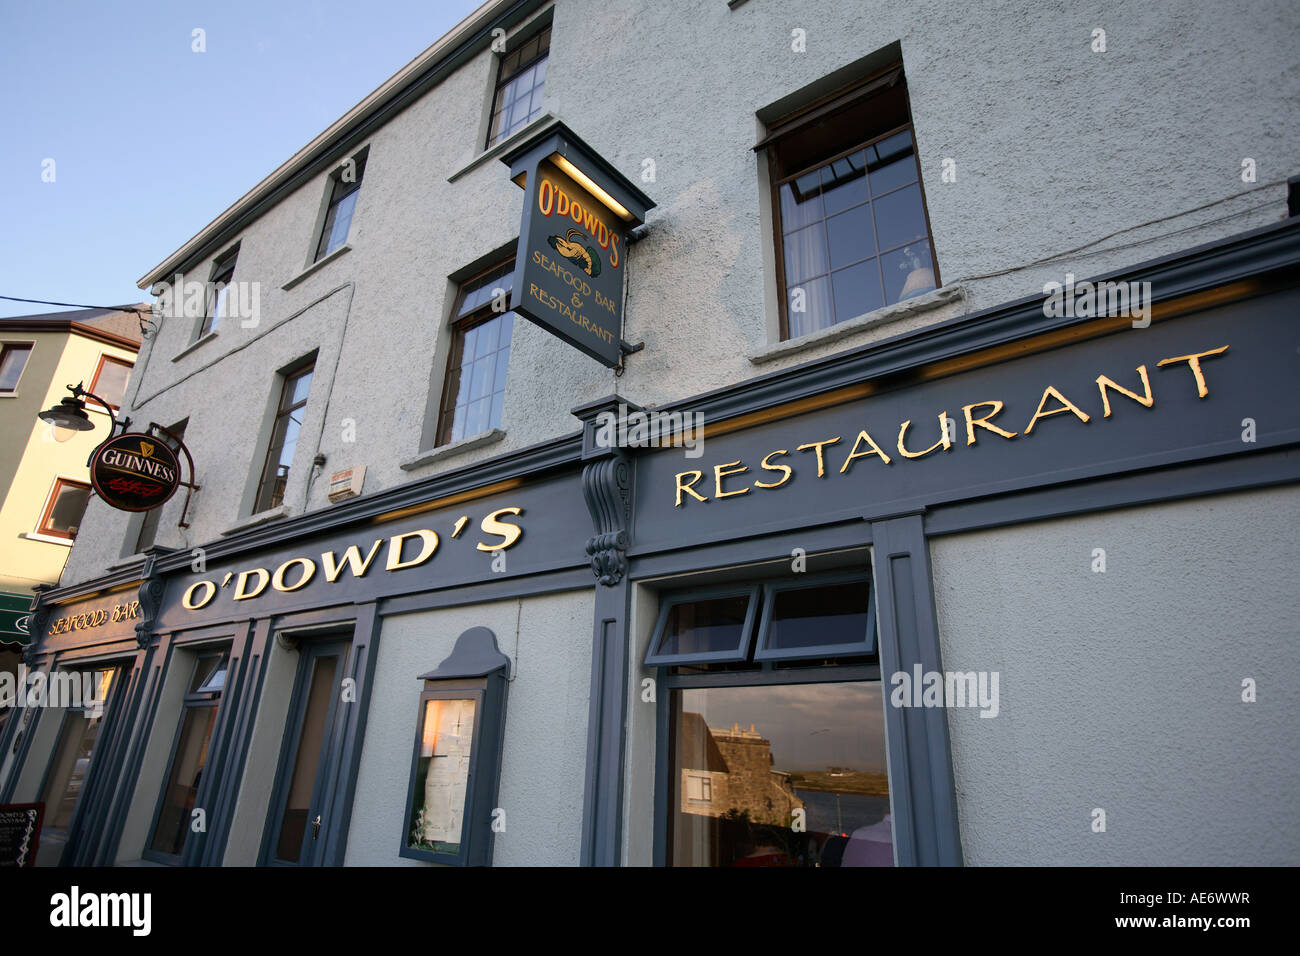 europe west coast of ireland county galway roundstone the front of o dowd s seafood bar and restaurant Stock Photo